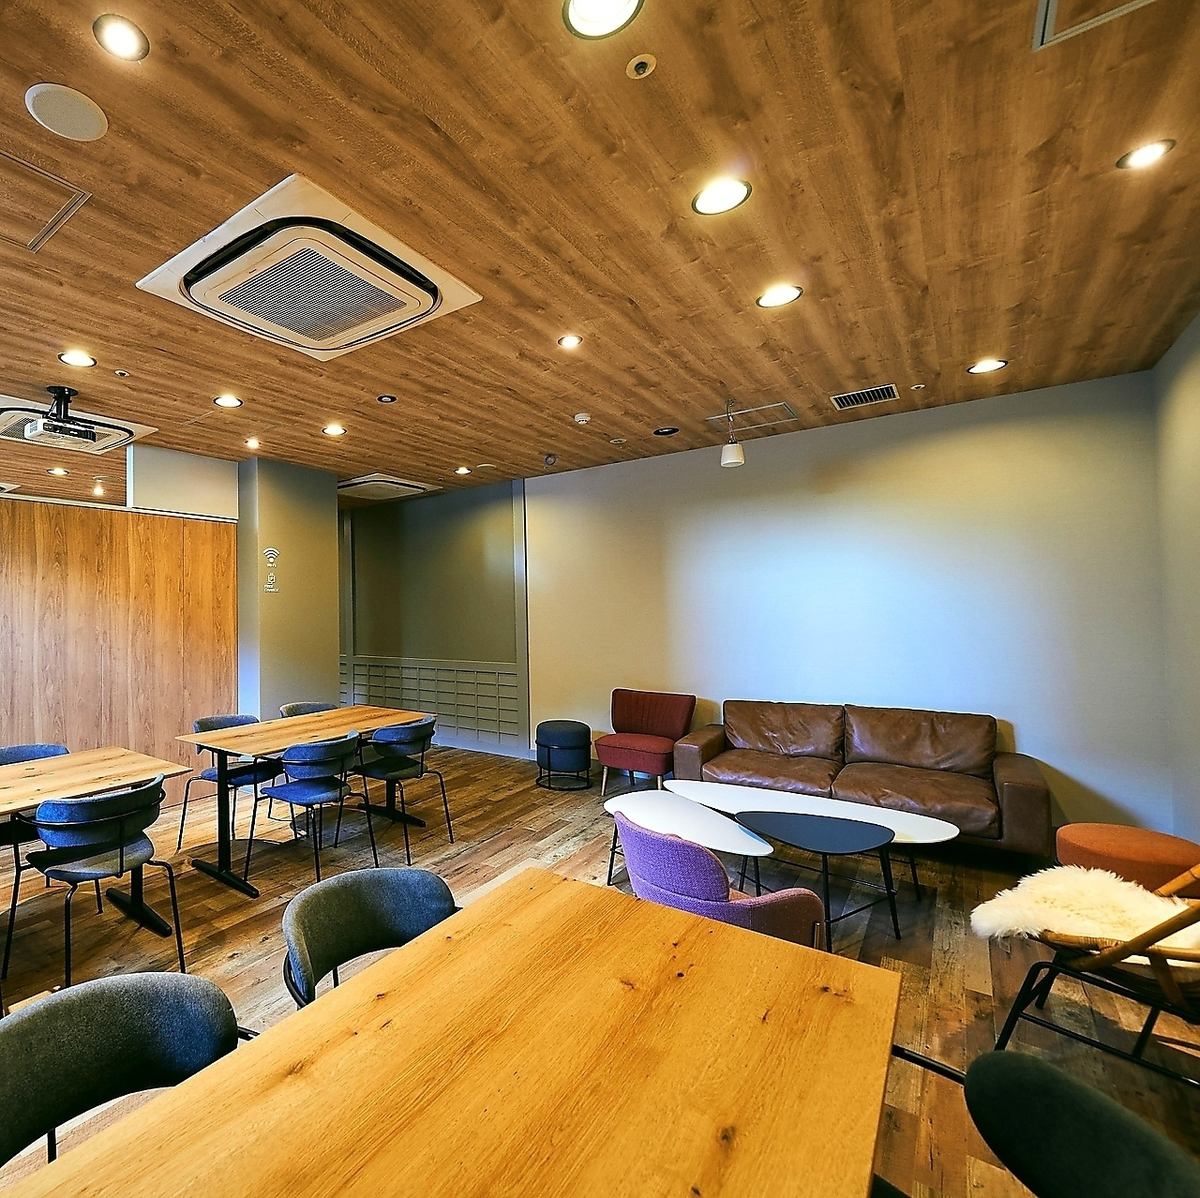 Private rooms for up to 26 people and private rooms are also available! Please feel free to contact us♪